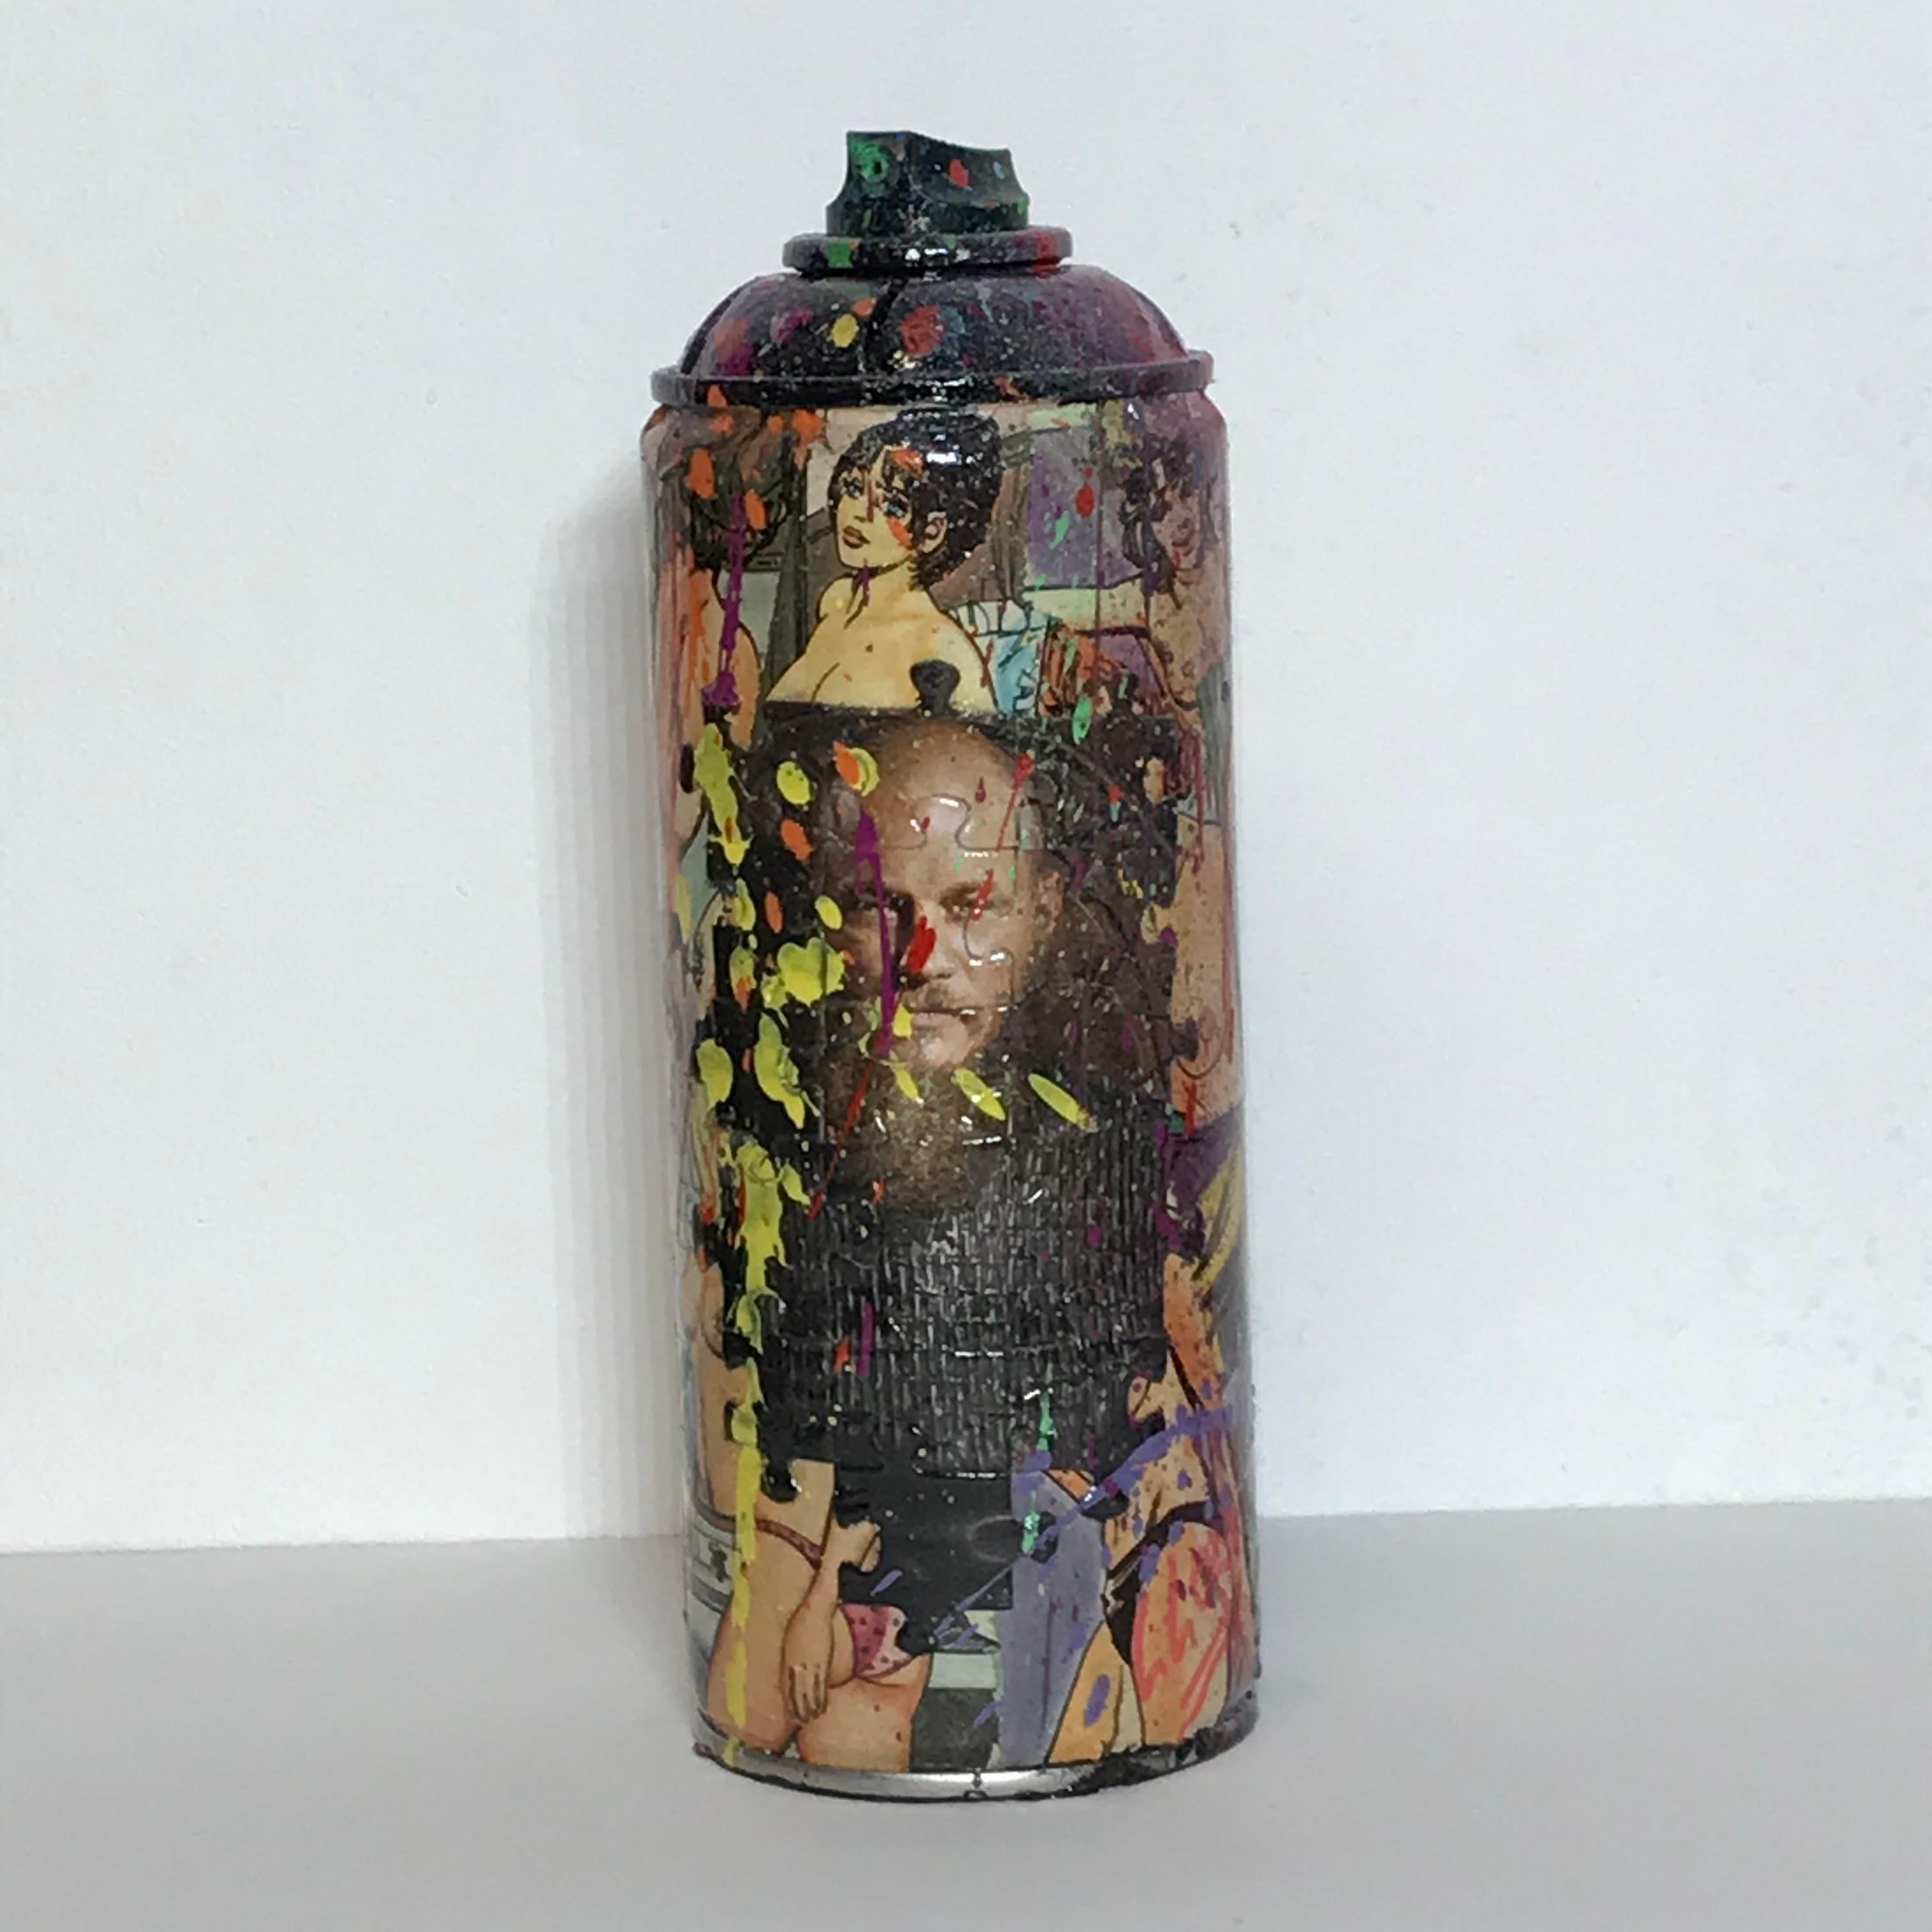 2021
collages of vignettes from erotic comics of the 70s and 80s, small formats and puzzle pieces of characters from TV series or superheroes and trashing with spray cans.
on recycled aerosol can
Dimensions: 18 x 7 cm 
signed on the can on the right